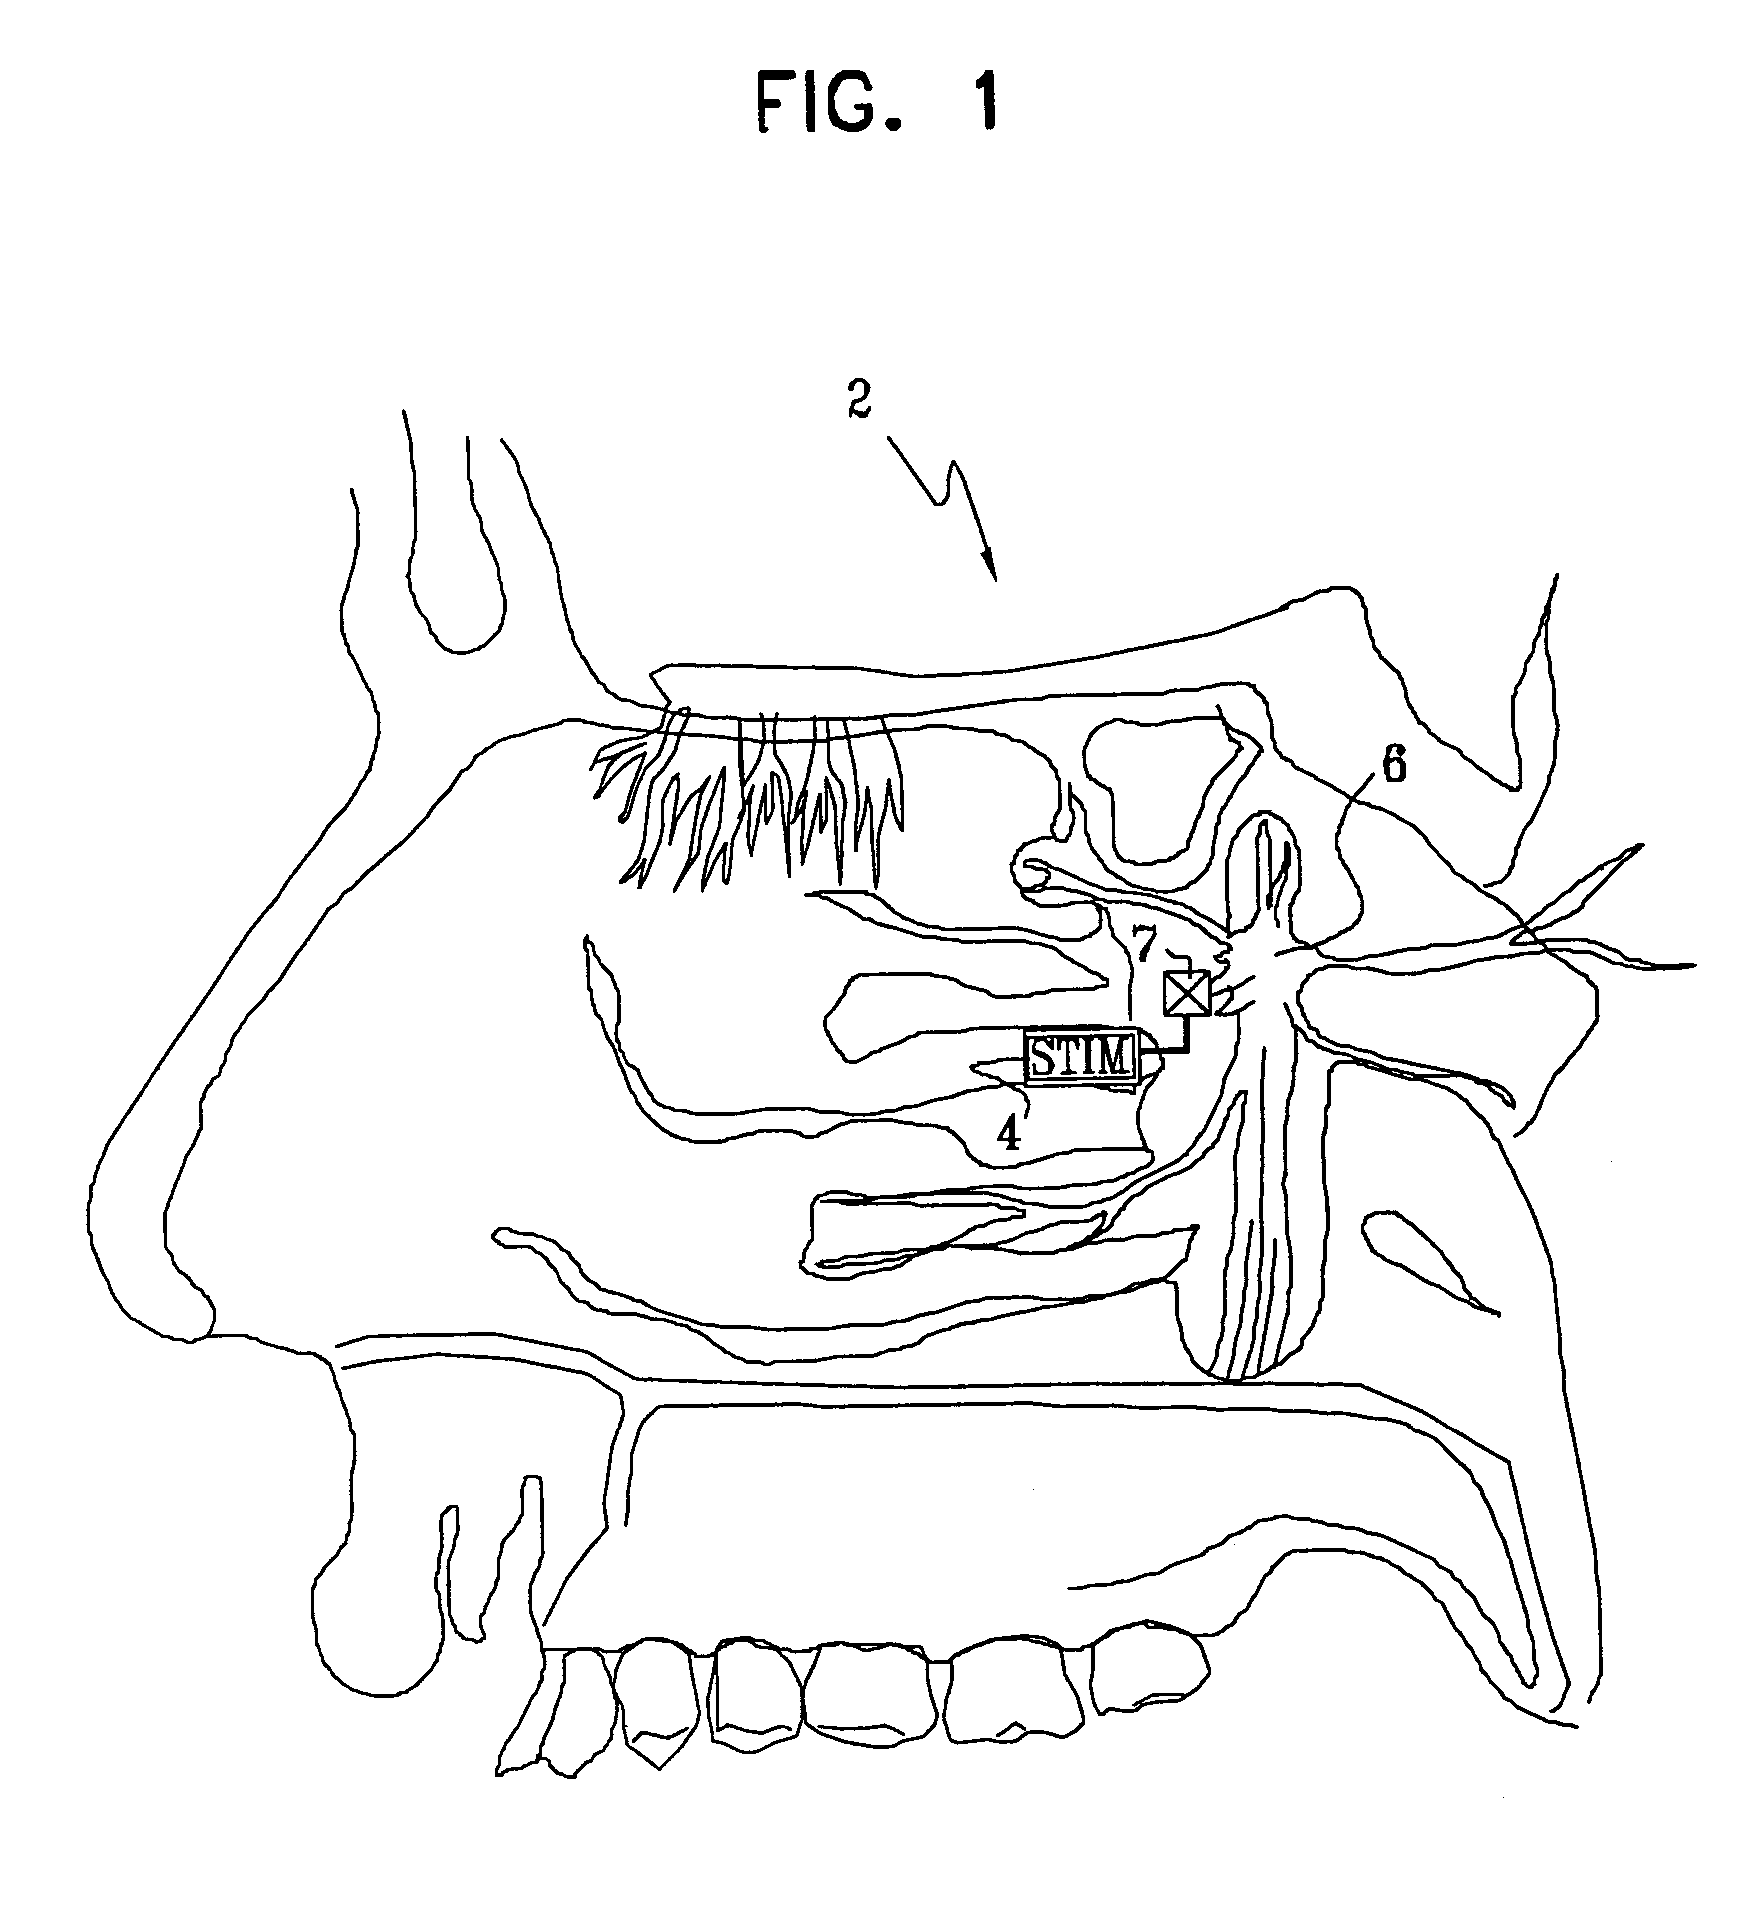 Method and apparatus for stimulating the sphenopalatine ganglion to modify properties of the BBB and cerebral blood flow